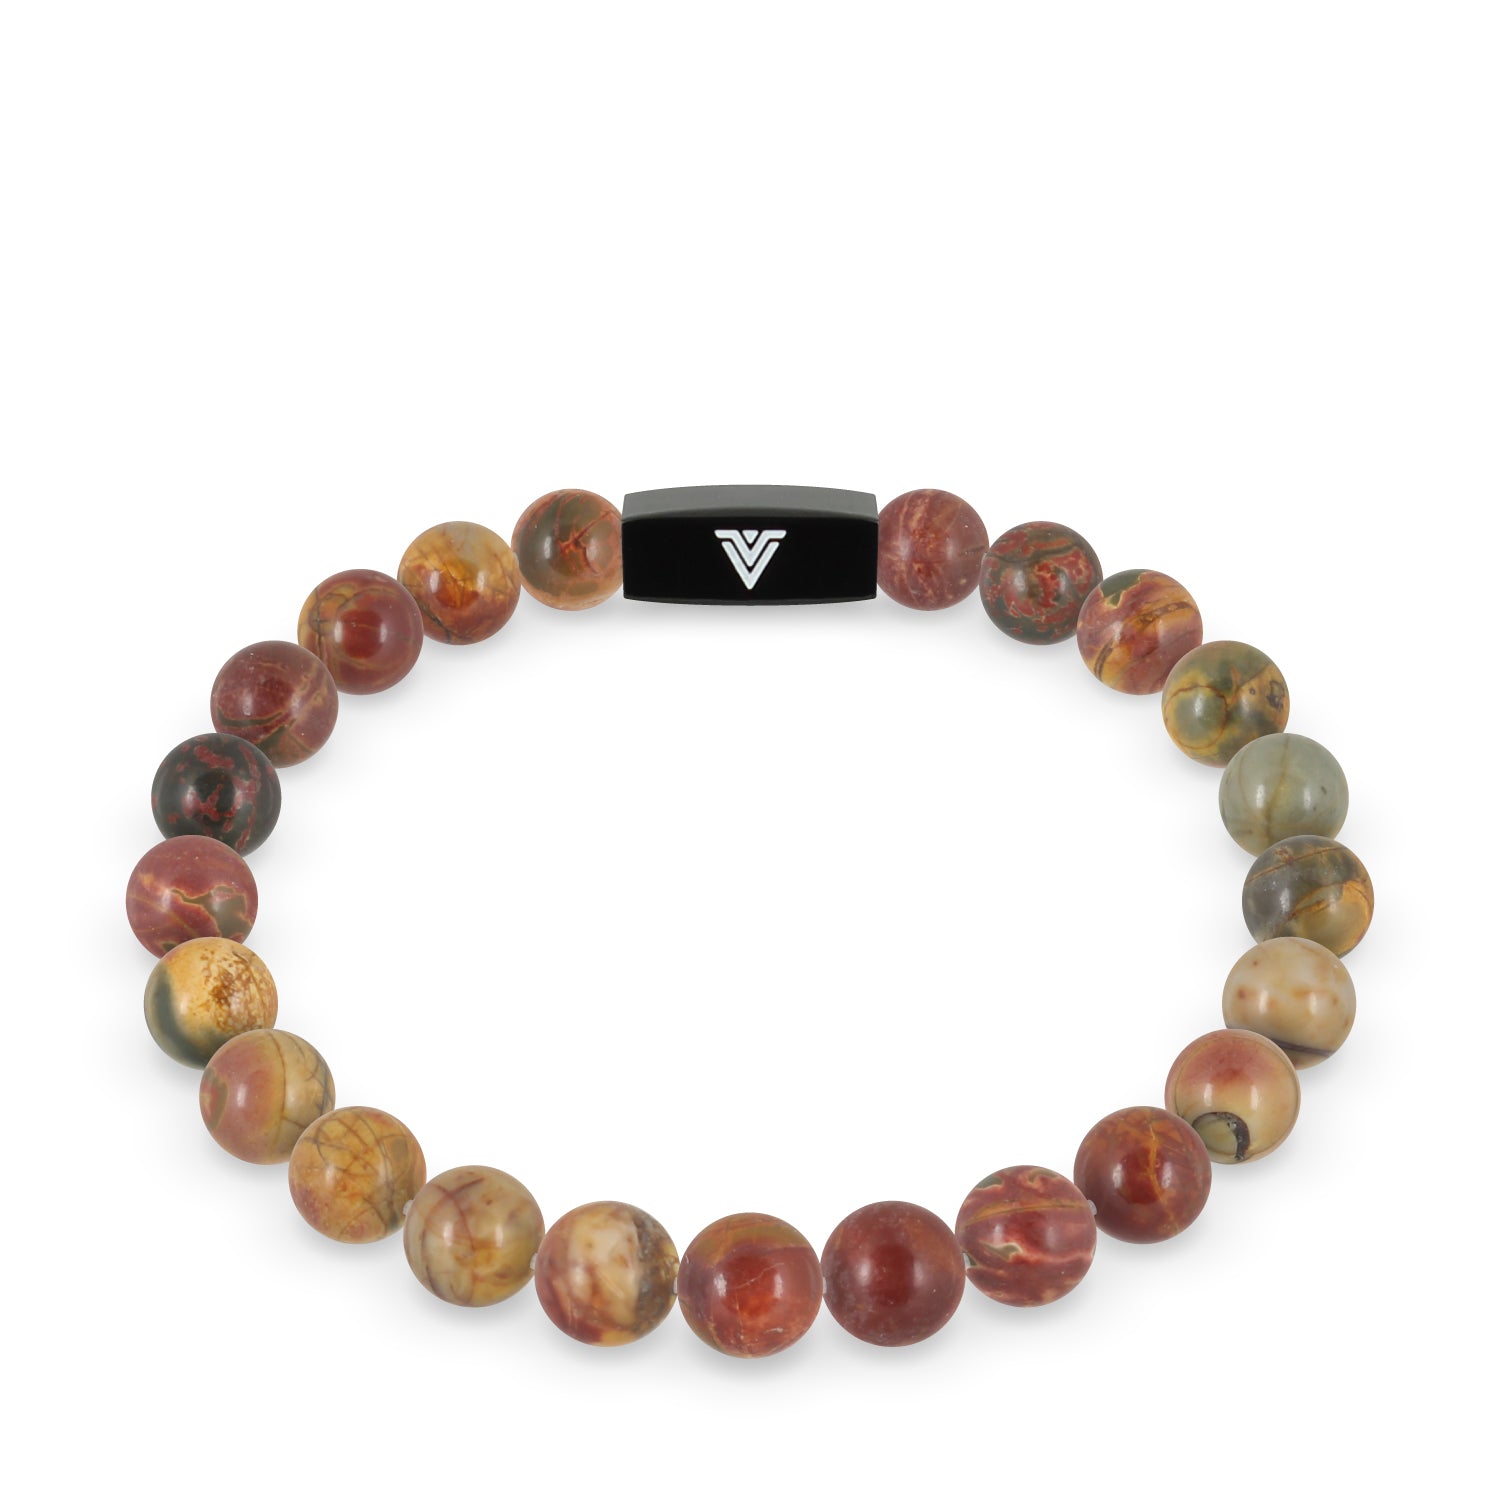 Front view of an 8mm Red Creek Jasper crystal beaded stretch bracelet with black stainless steel logo bead made by Voltlin